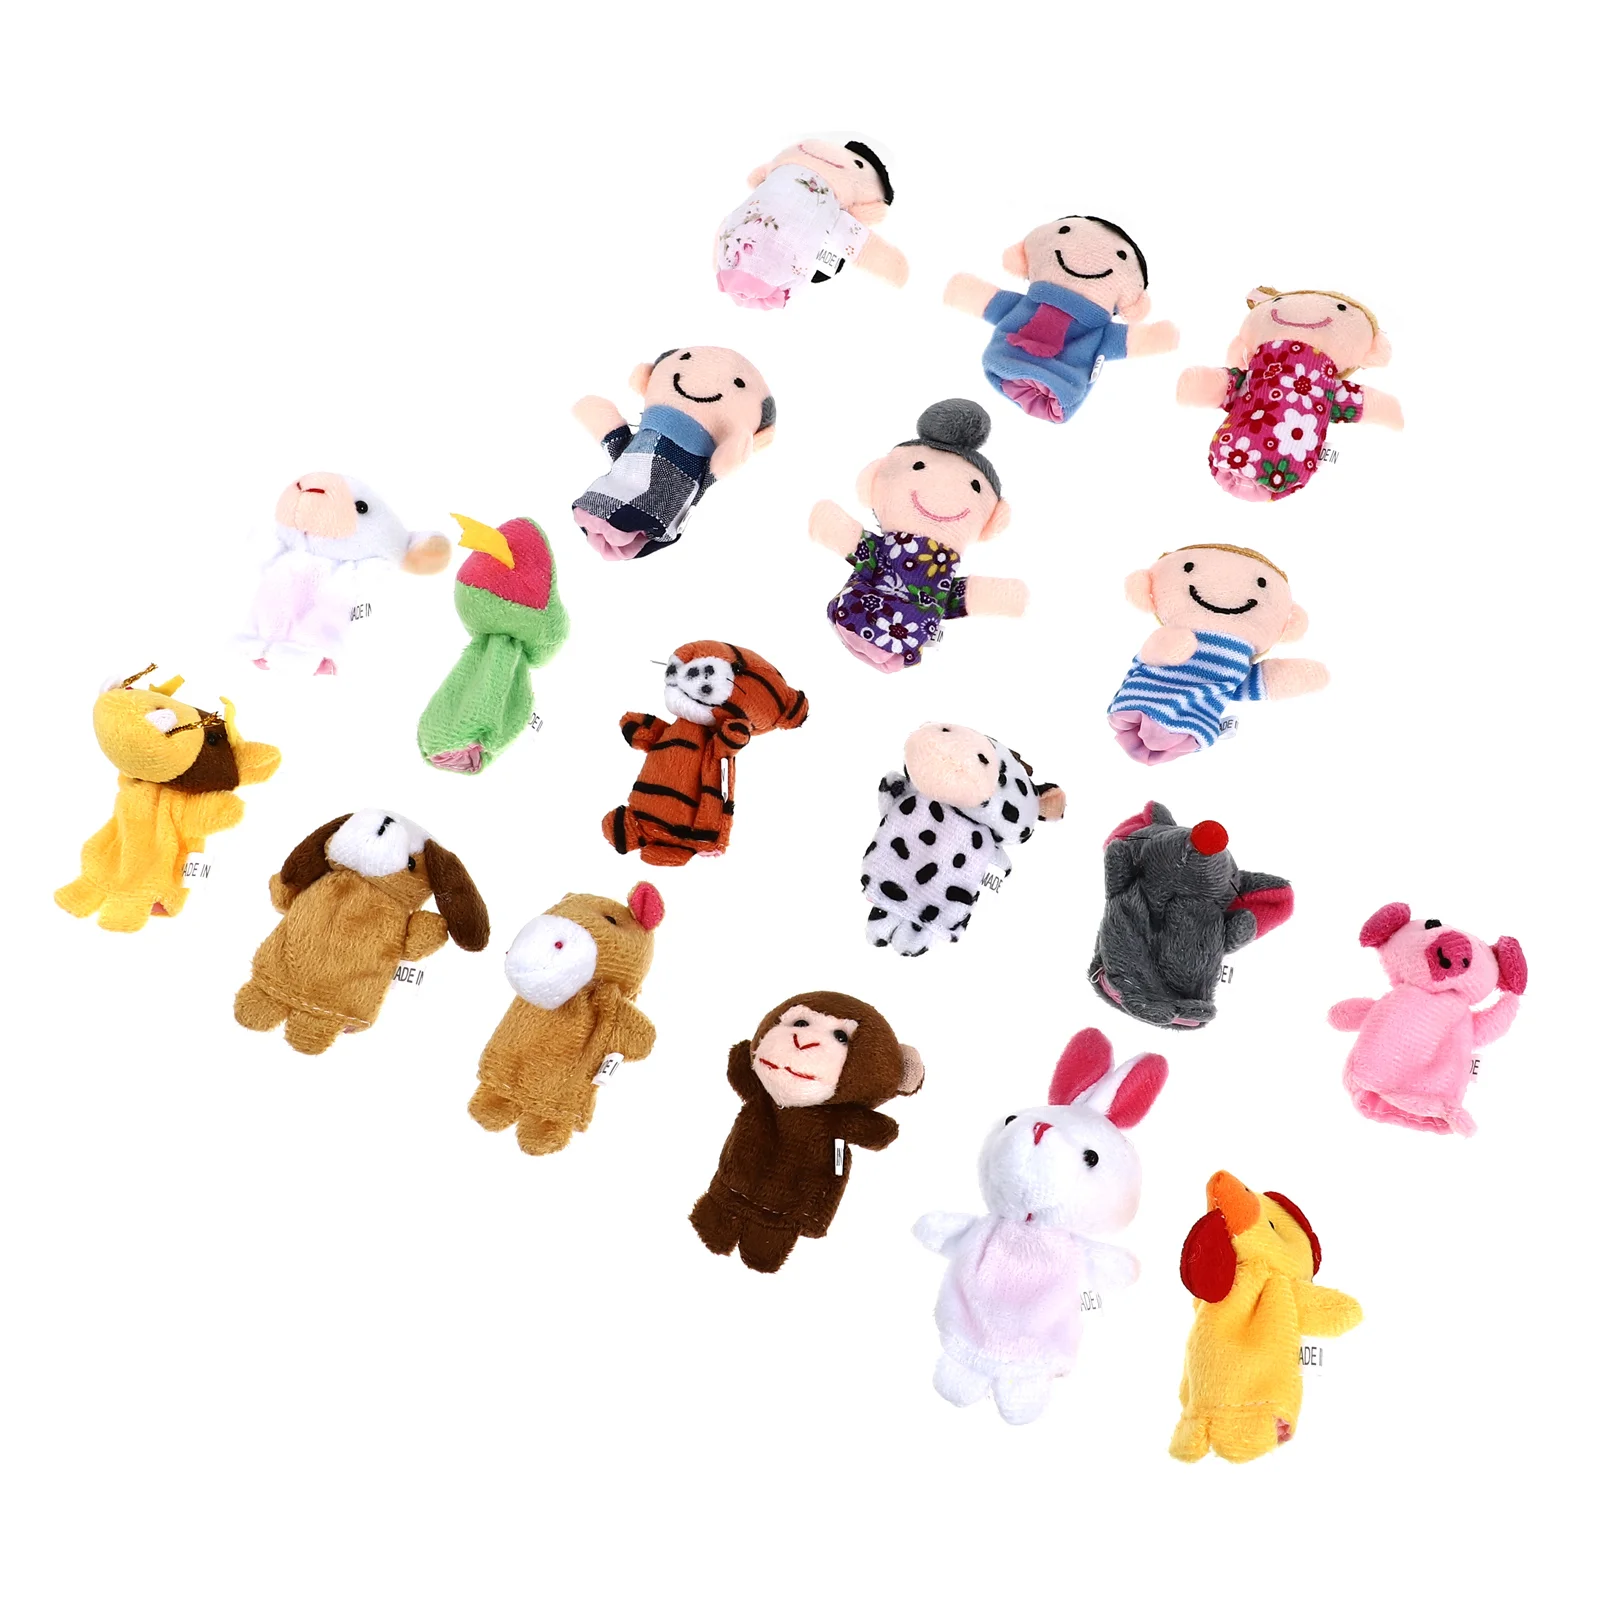 

18pcs Finger Puppets Set 12 (Mixed Style)6 People Finger Puppets Kids Educational for Storytelling Role- Playing Teaching Eggs